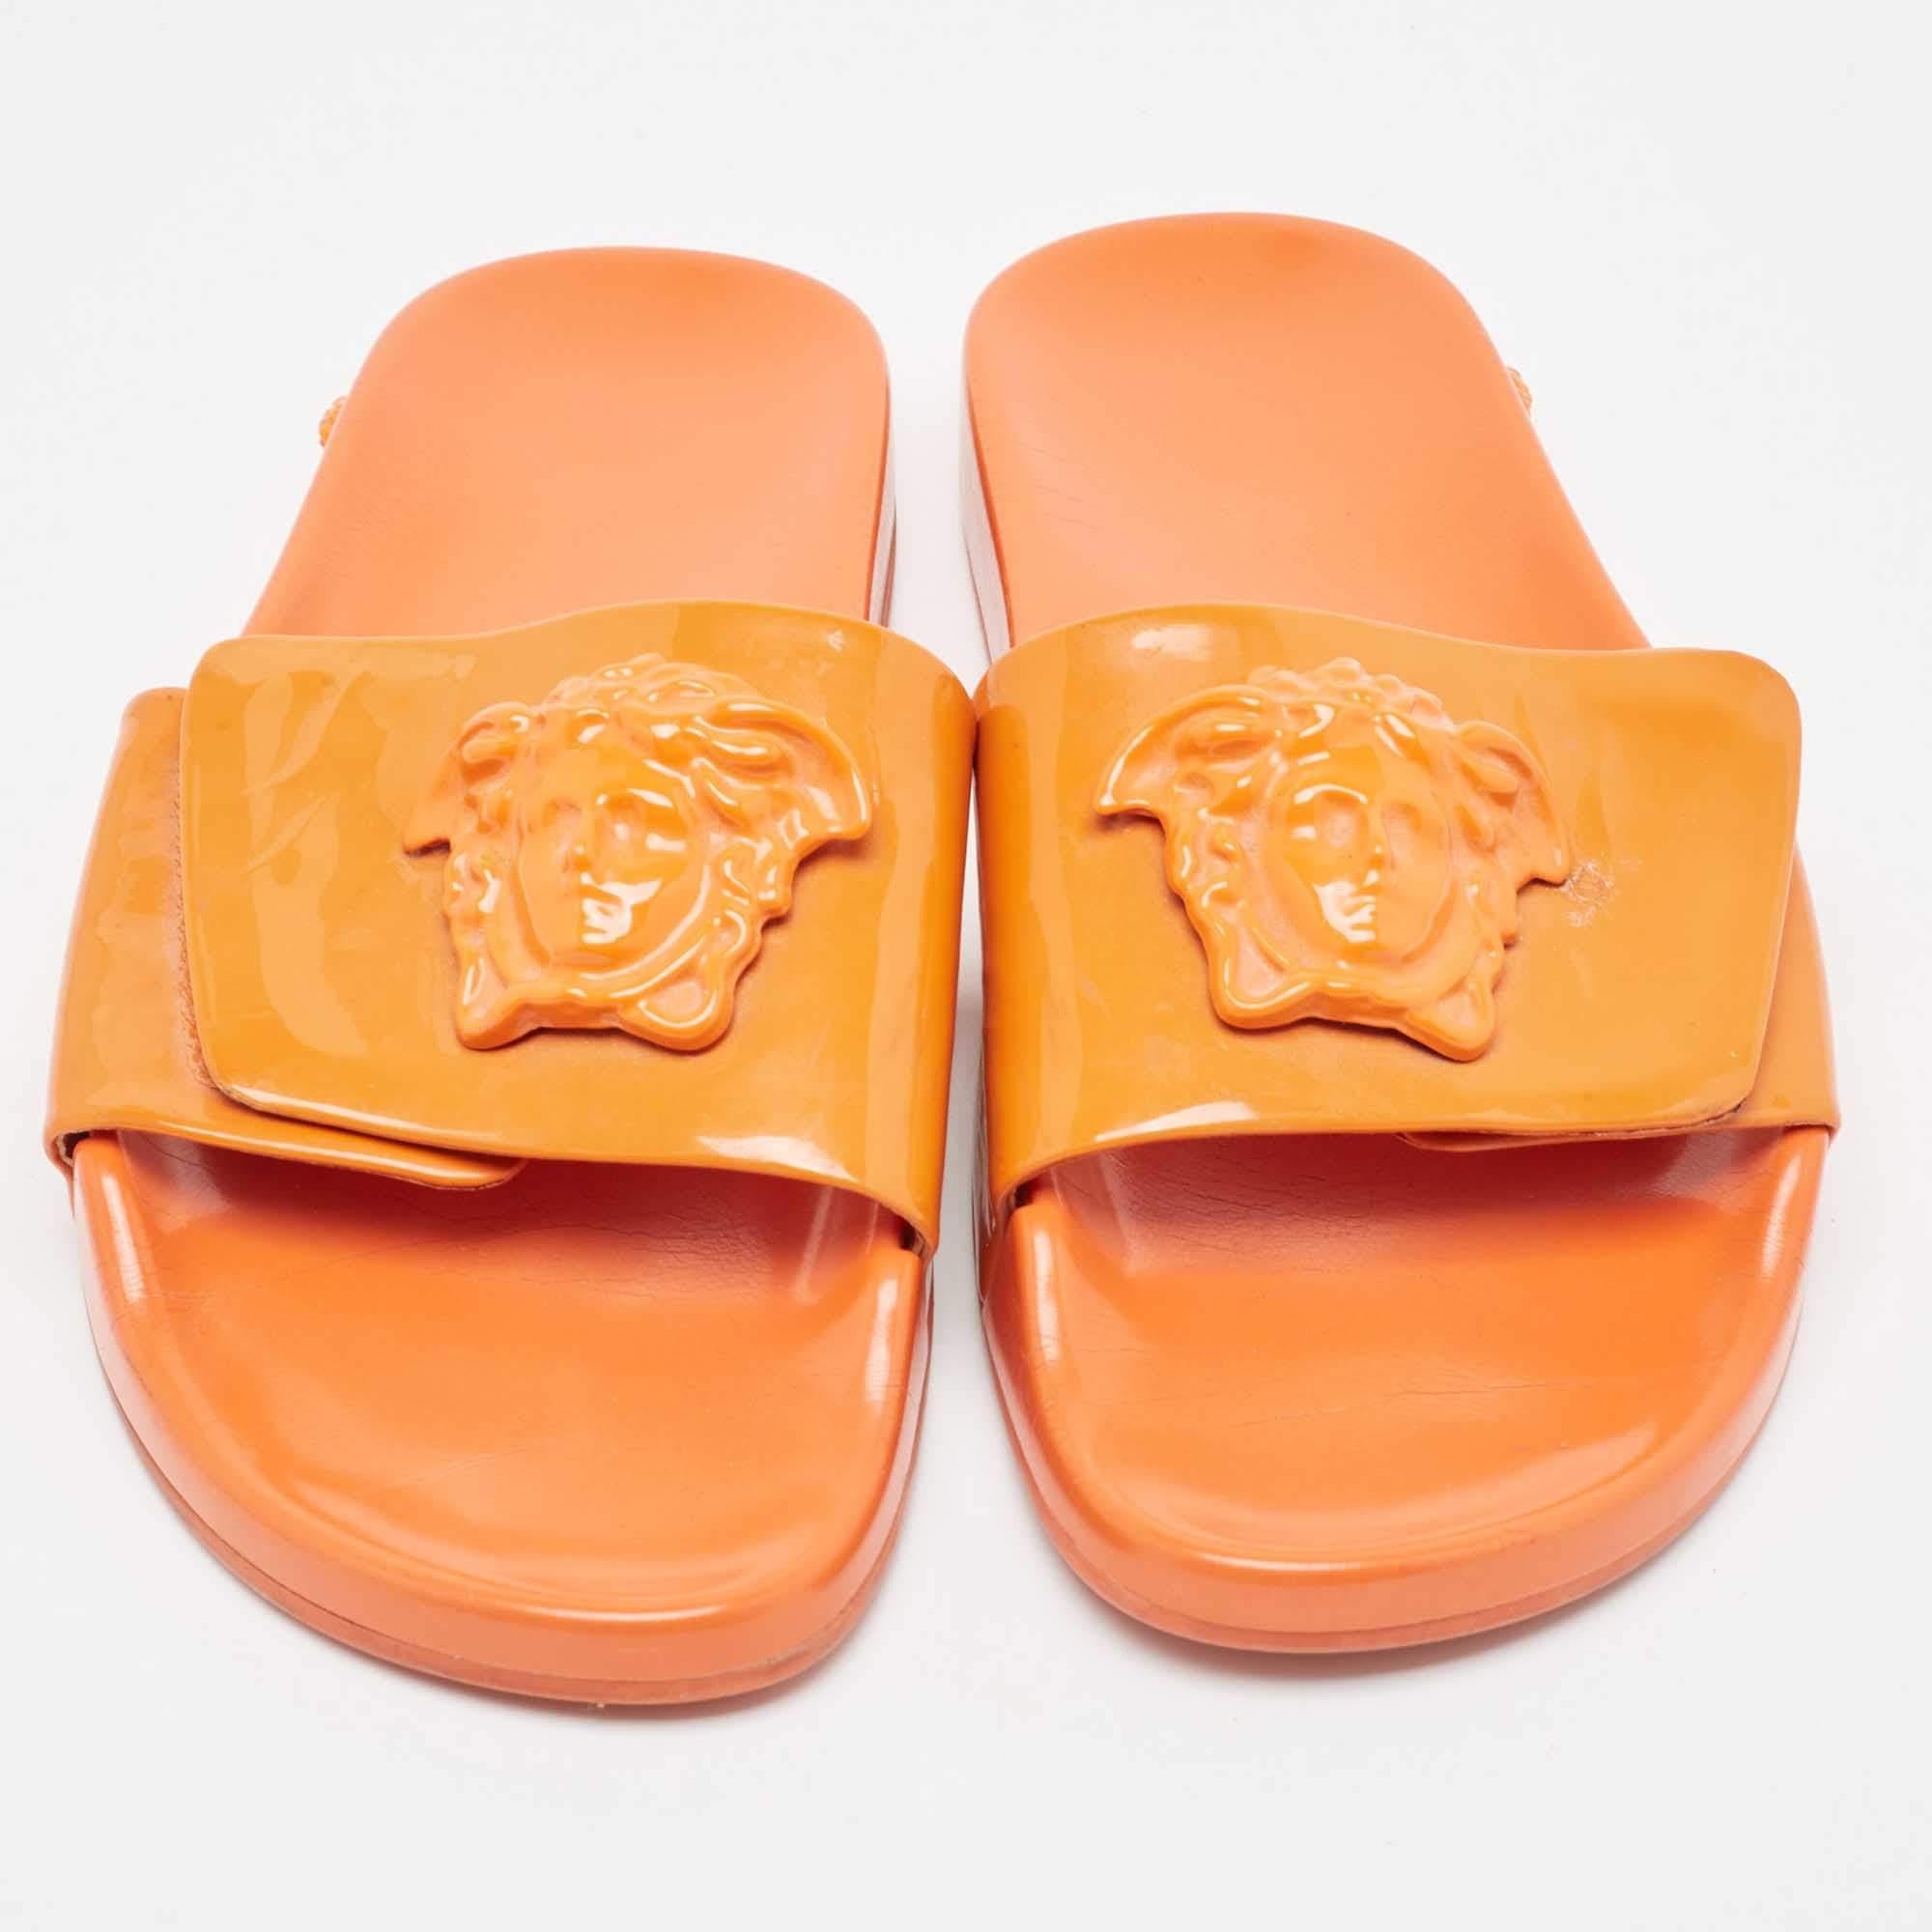 Create effortless styles with these Versace Medusa slides. Made of quality materials, they are designed to elevate your OOTD and keep you in comfort all day long.

